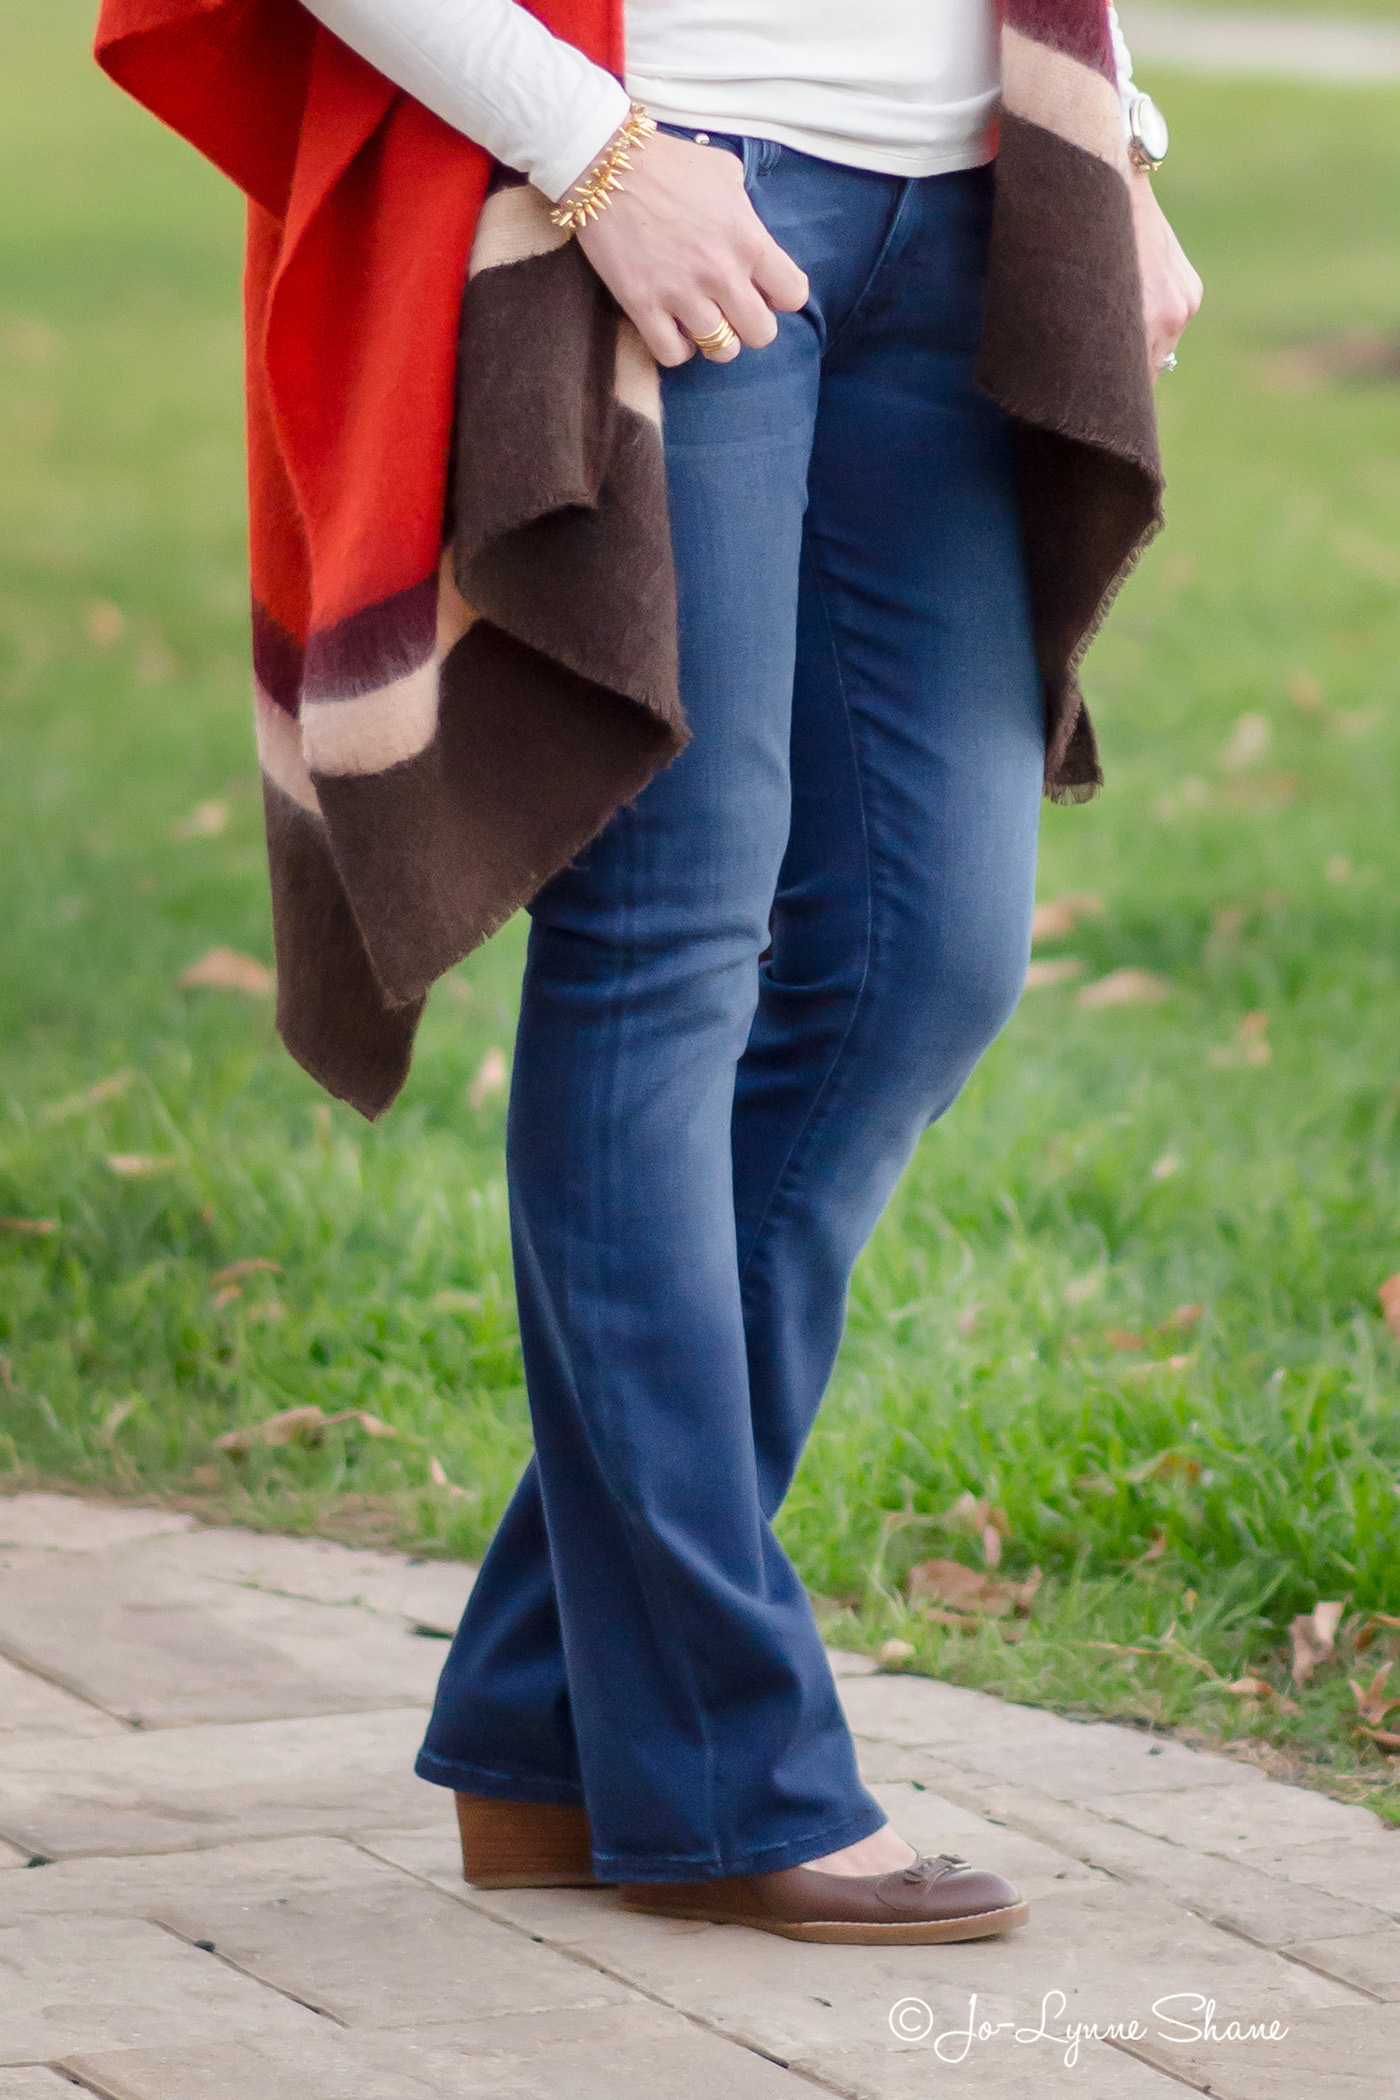 25 Days of Winter Outfit Ideas: Poncho with Bootcut Jeans and Wedge Pumps